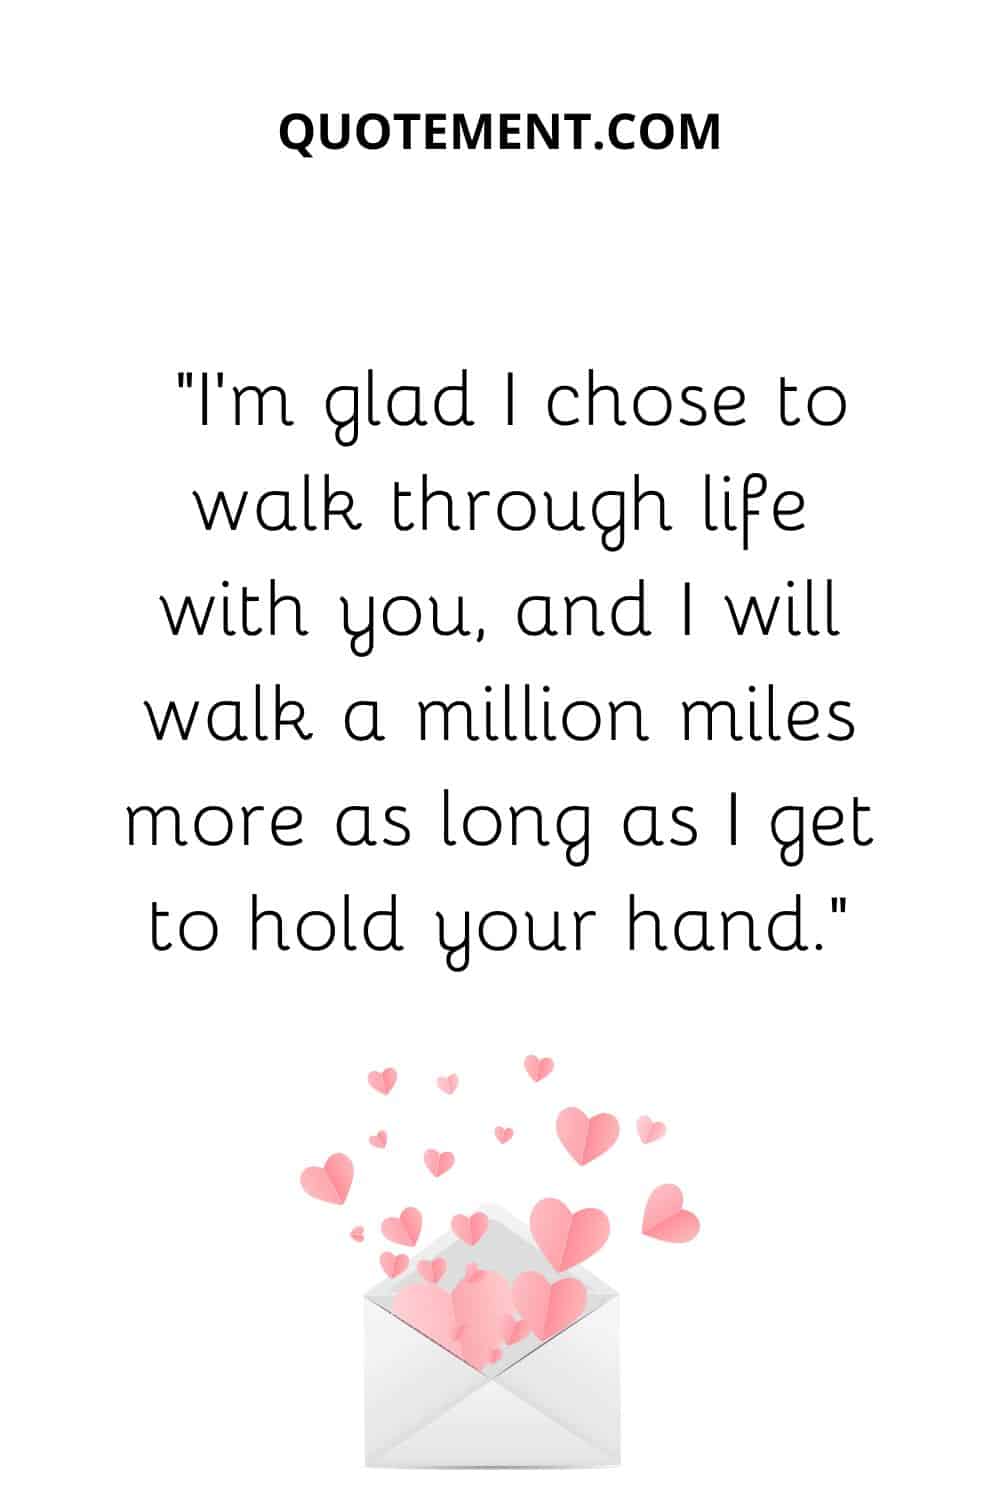 “I’m glad I chose to walk through life with you, and I will walk a million miles more as long as I get to hold your hand.”